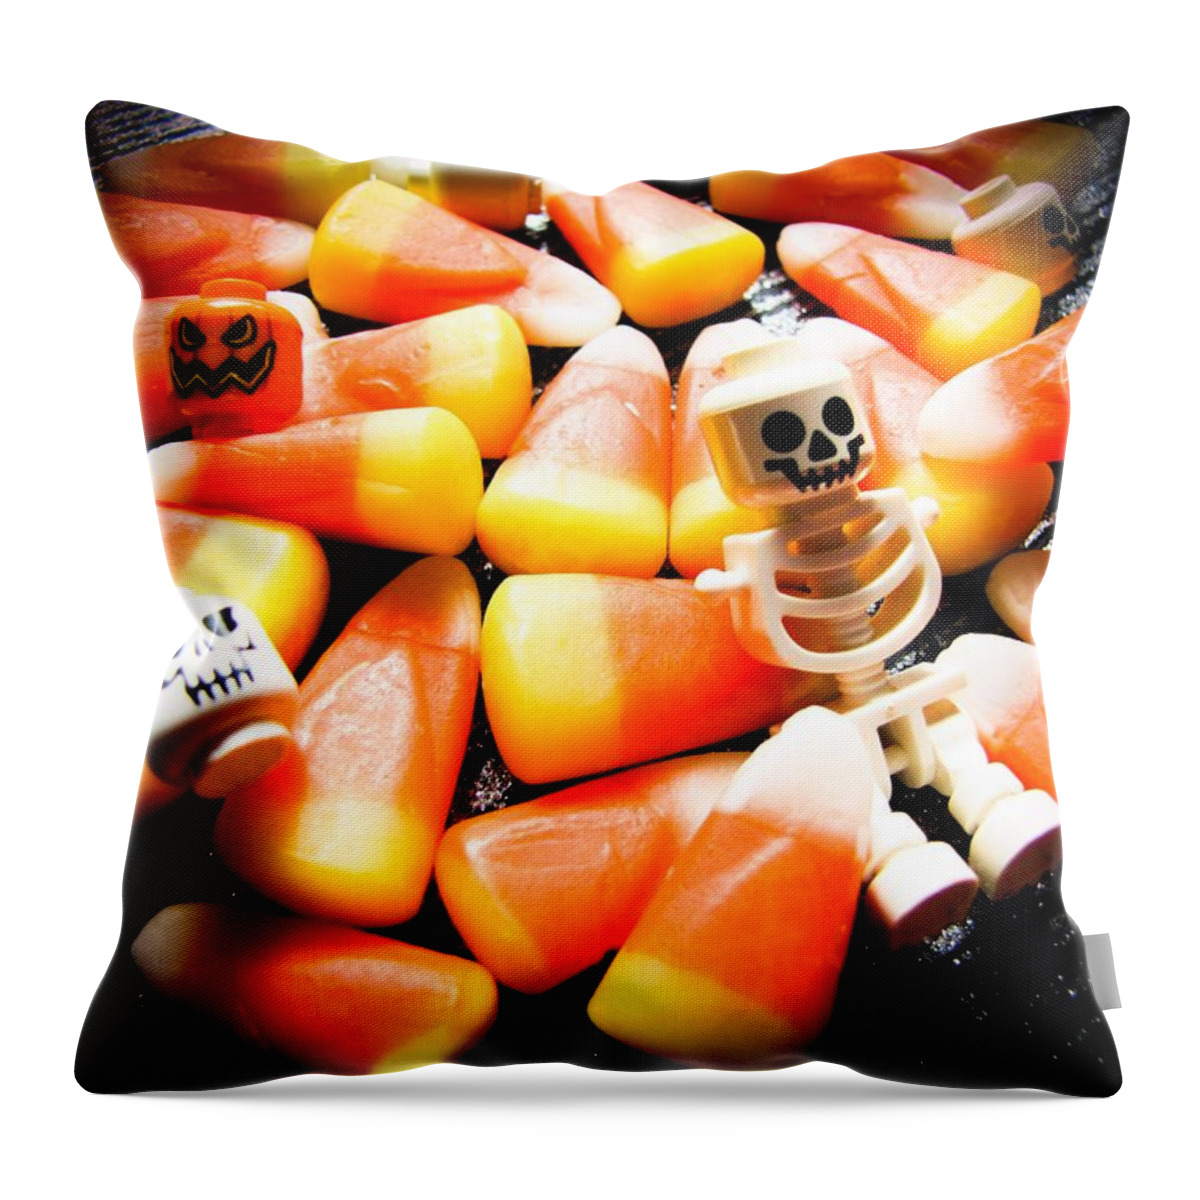 Candy Throw Pillow featuring the photograph Lego Candy Corn by Heather Estrada